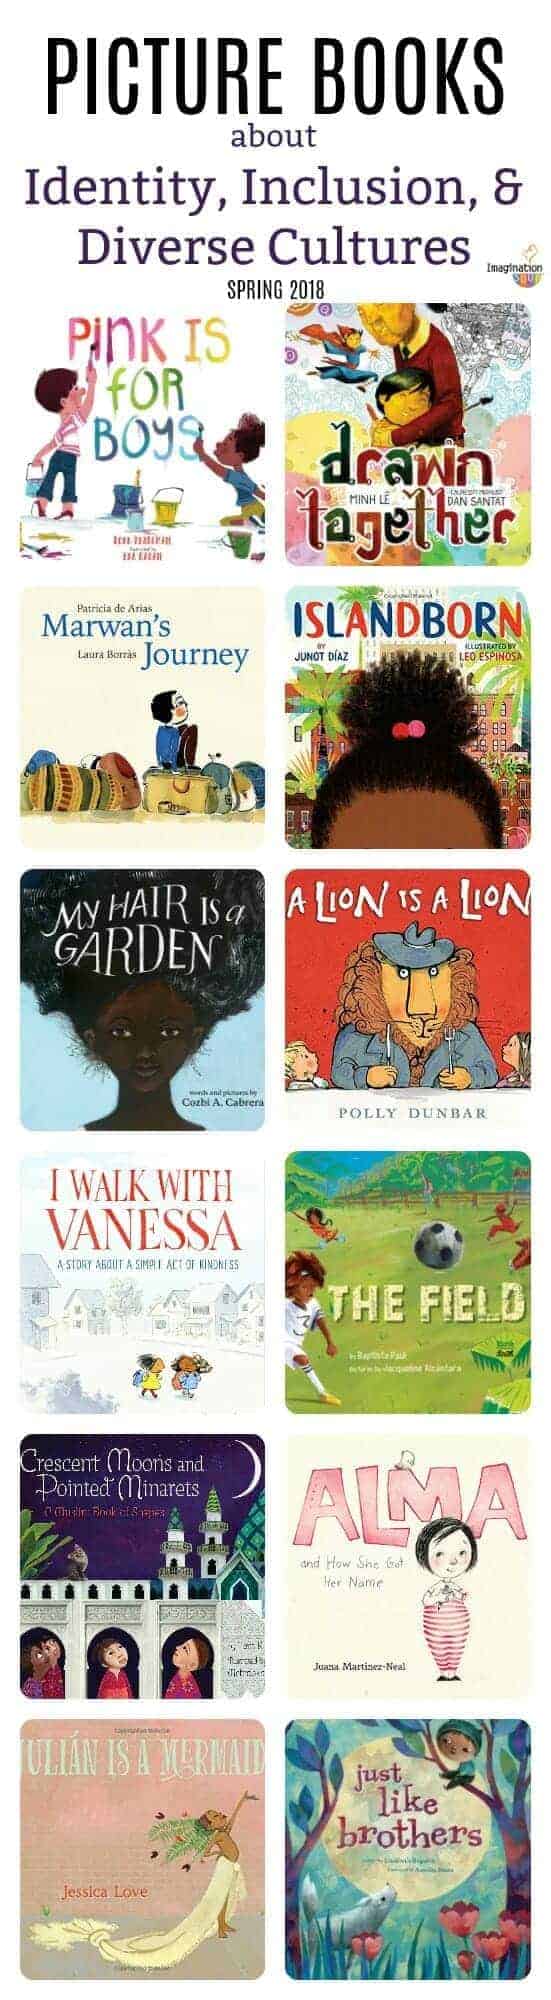 Spring 2018 Picture Books About Identity, Inclusion, and Diverse Cultures